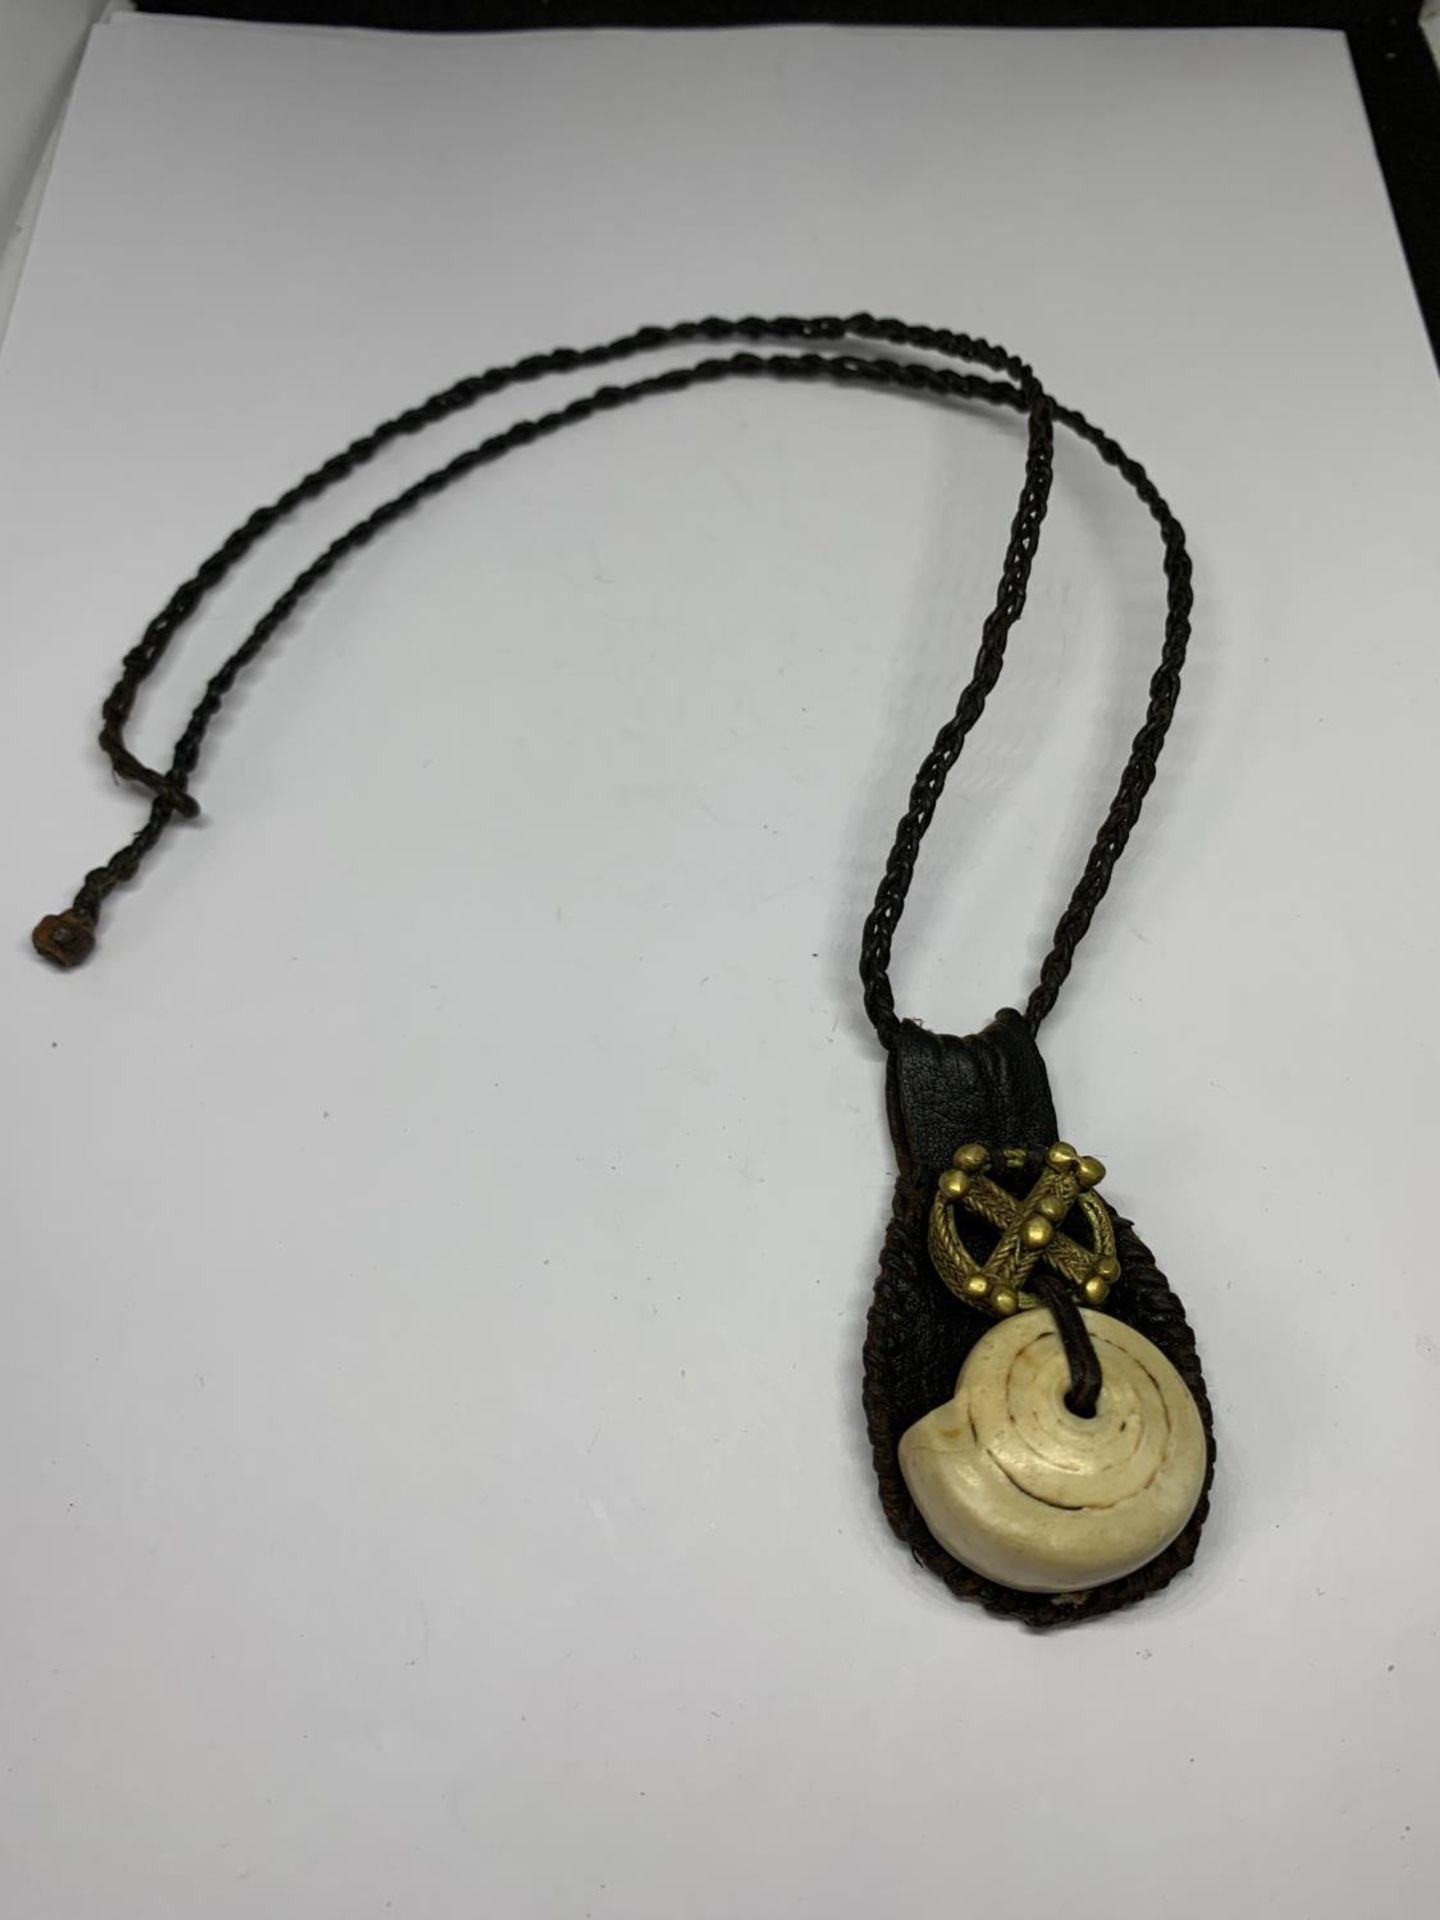 A TALISMAN GOOD LUCK AMULET ON LEATHER CORD